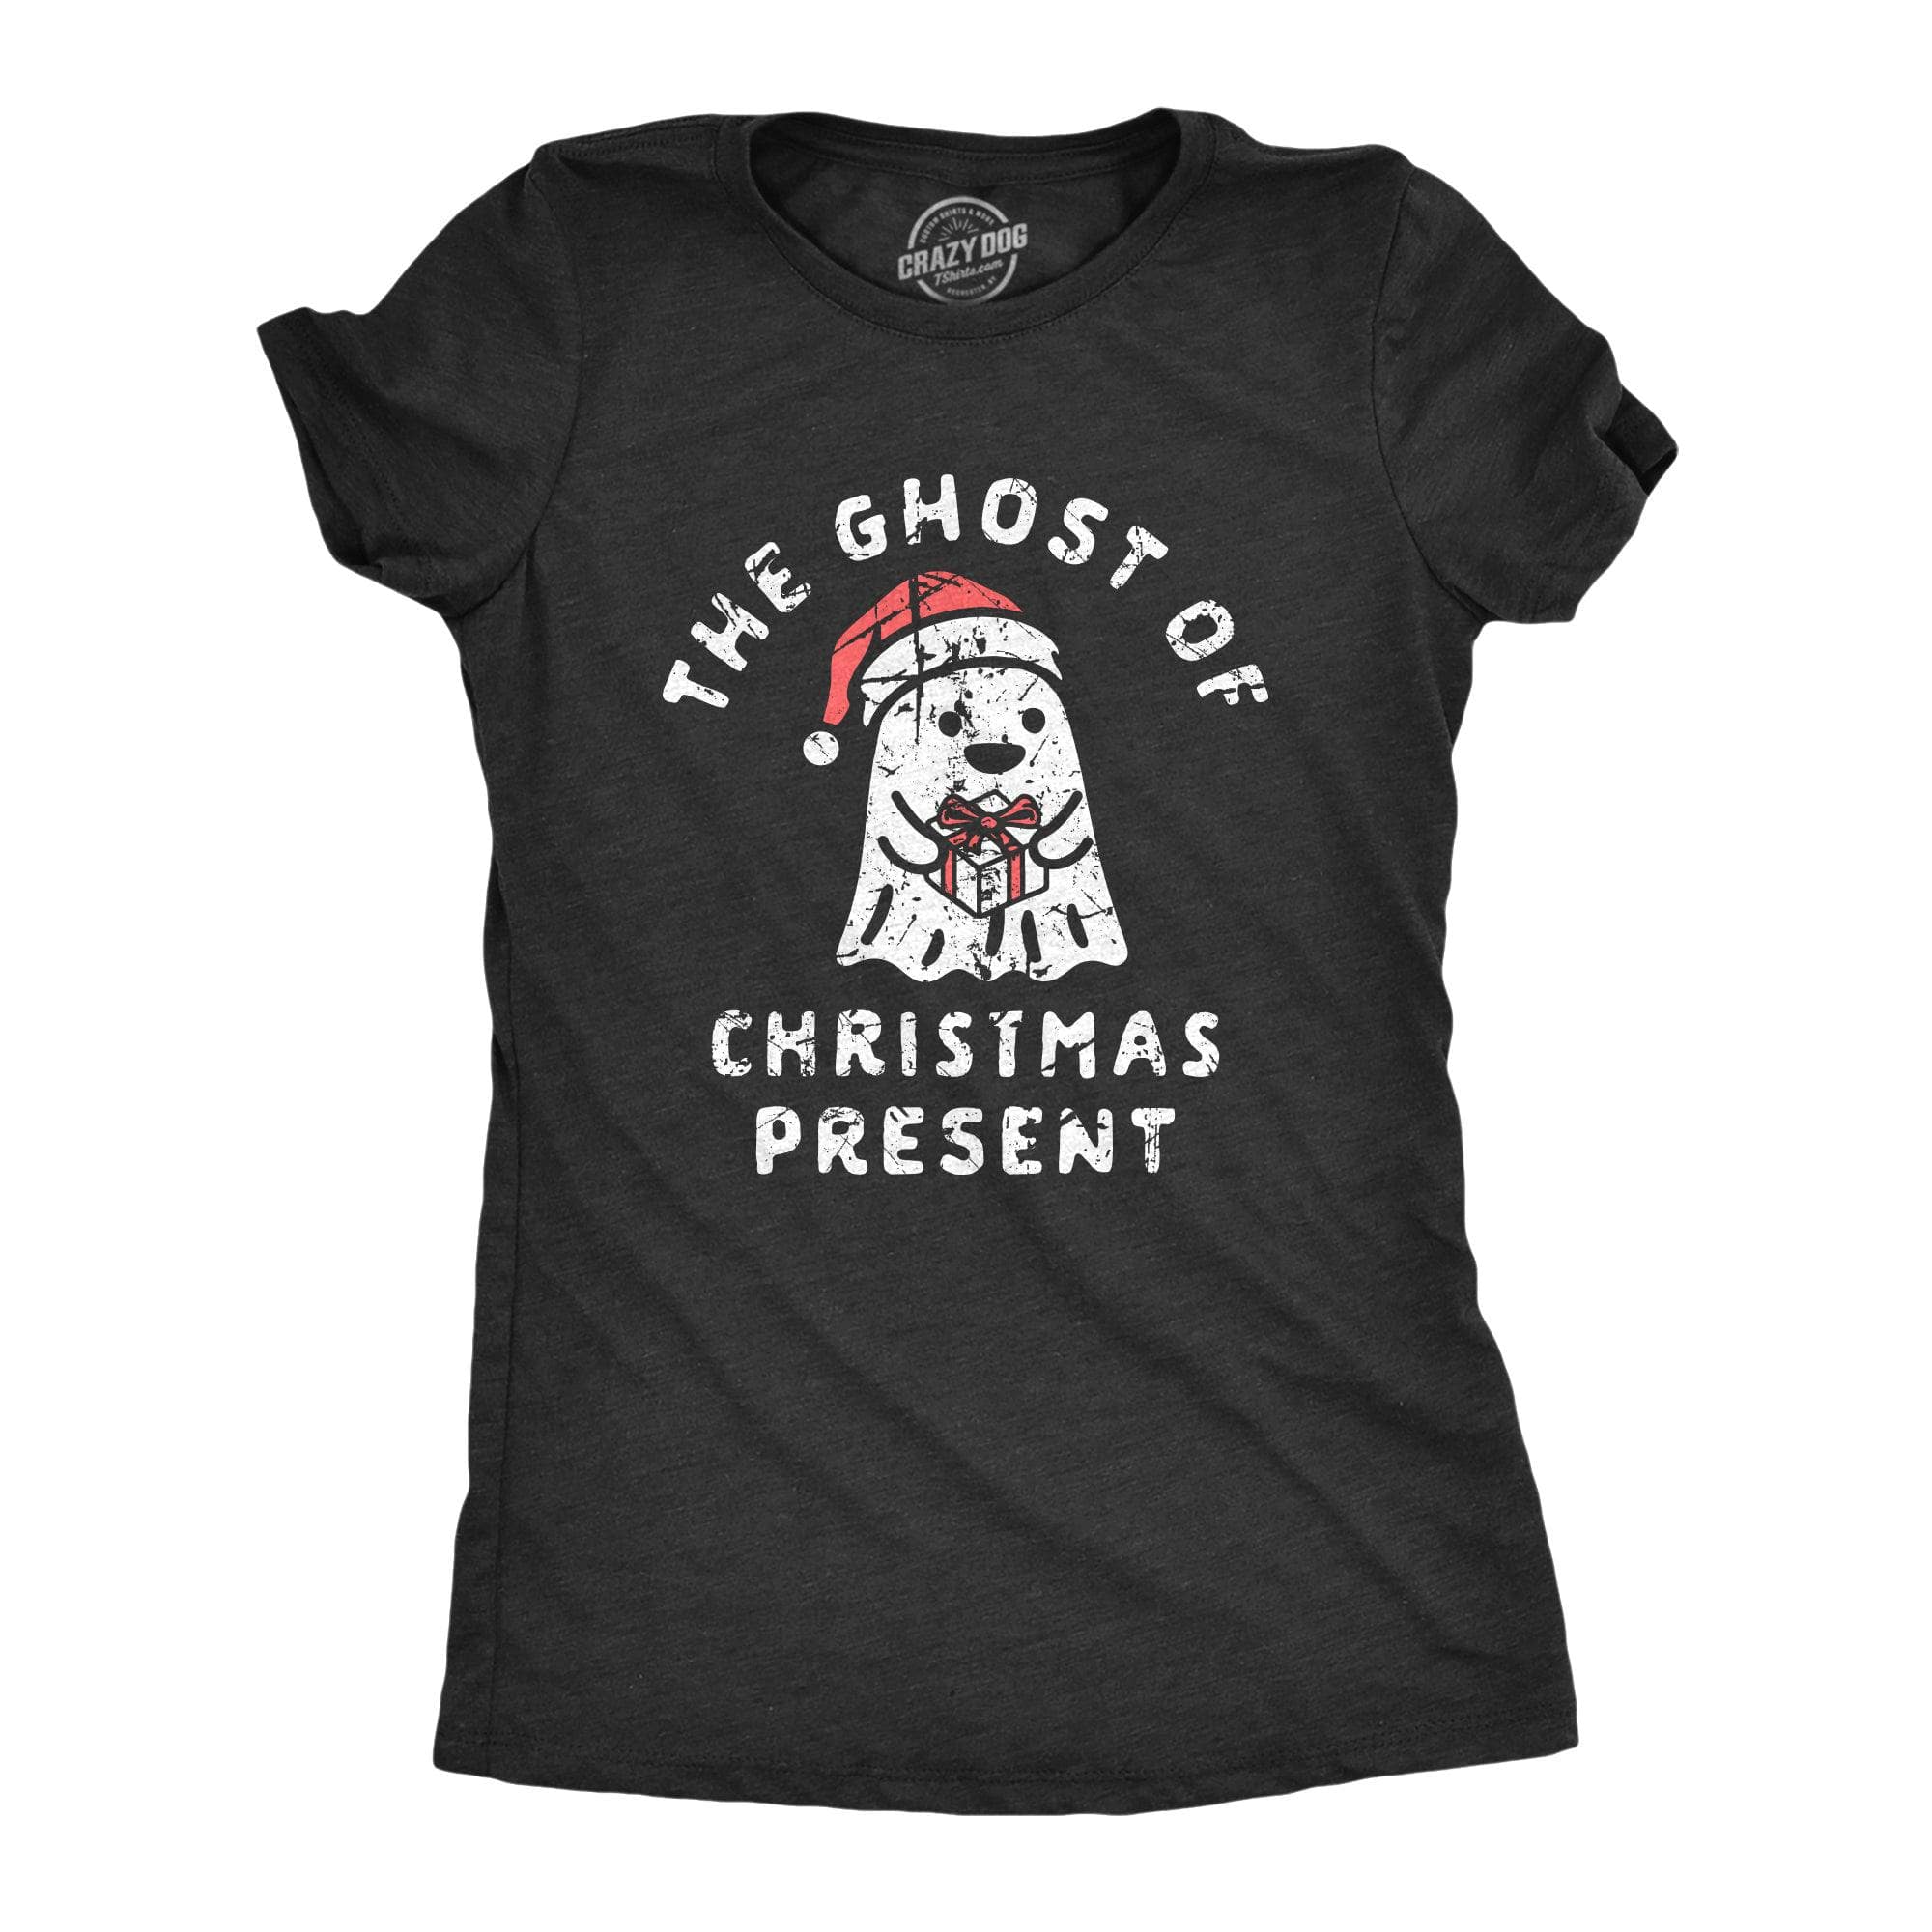 The Ghost Of Christmas Present Women's Tshirt  -  Crazy Dog T-Shirts